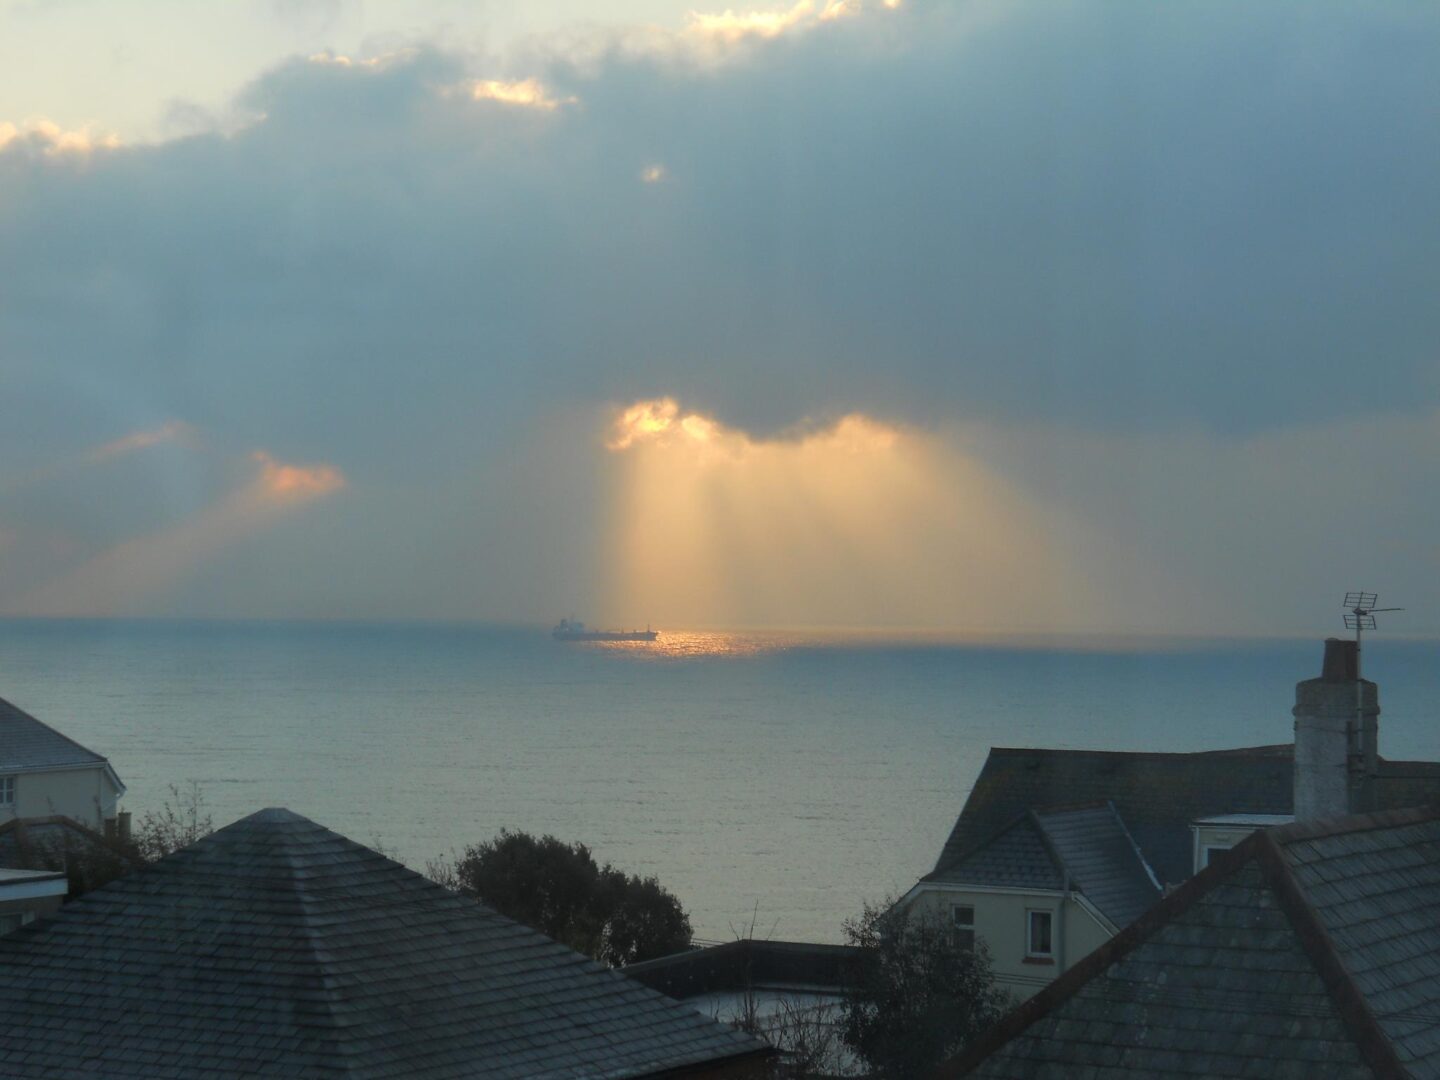 View over roof tops to the sea with sunlight shining through a gap in the clouds on a ship